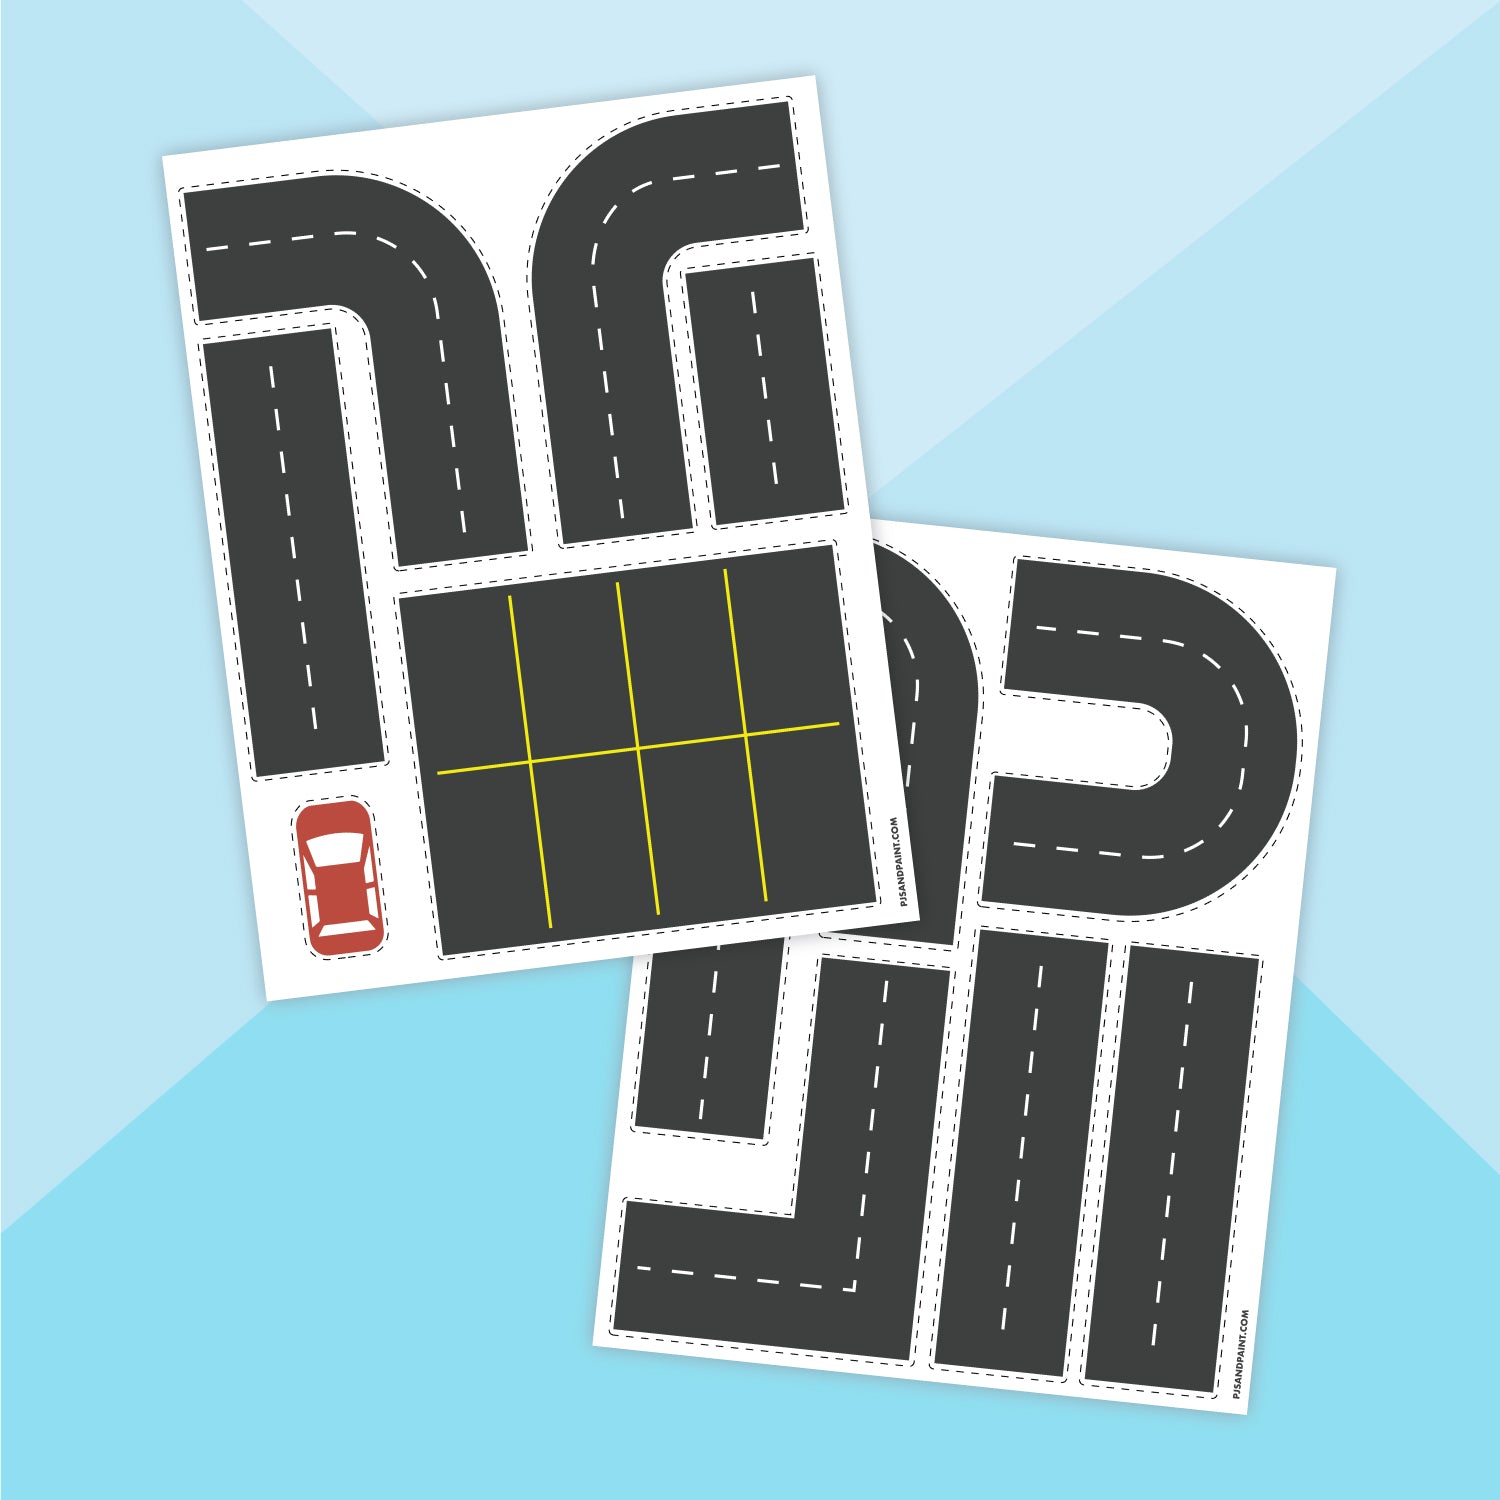 Printable Road Template with City Elements